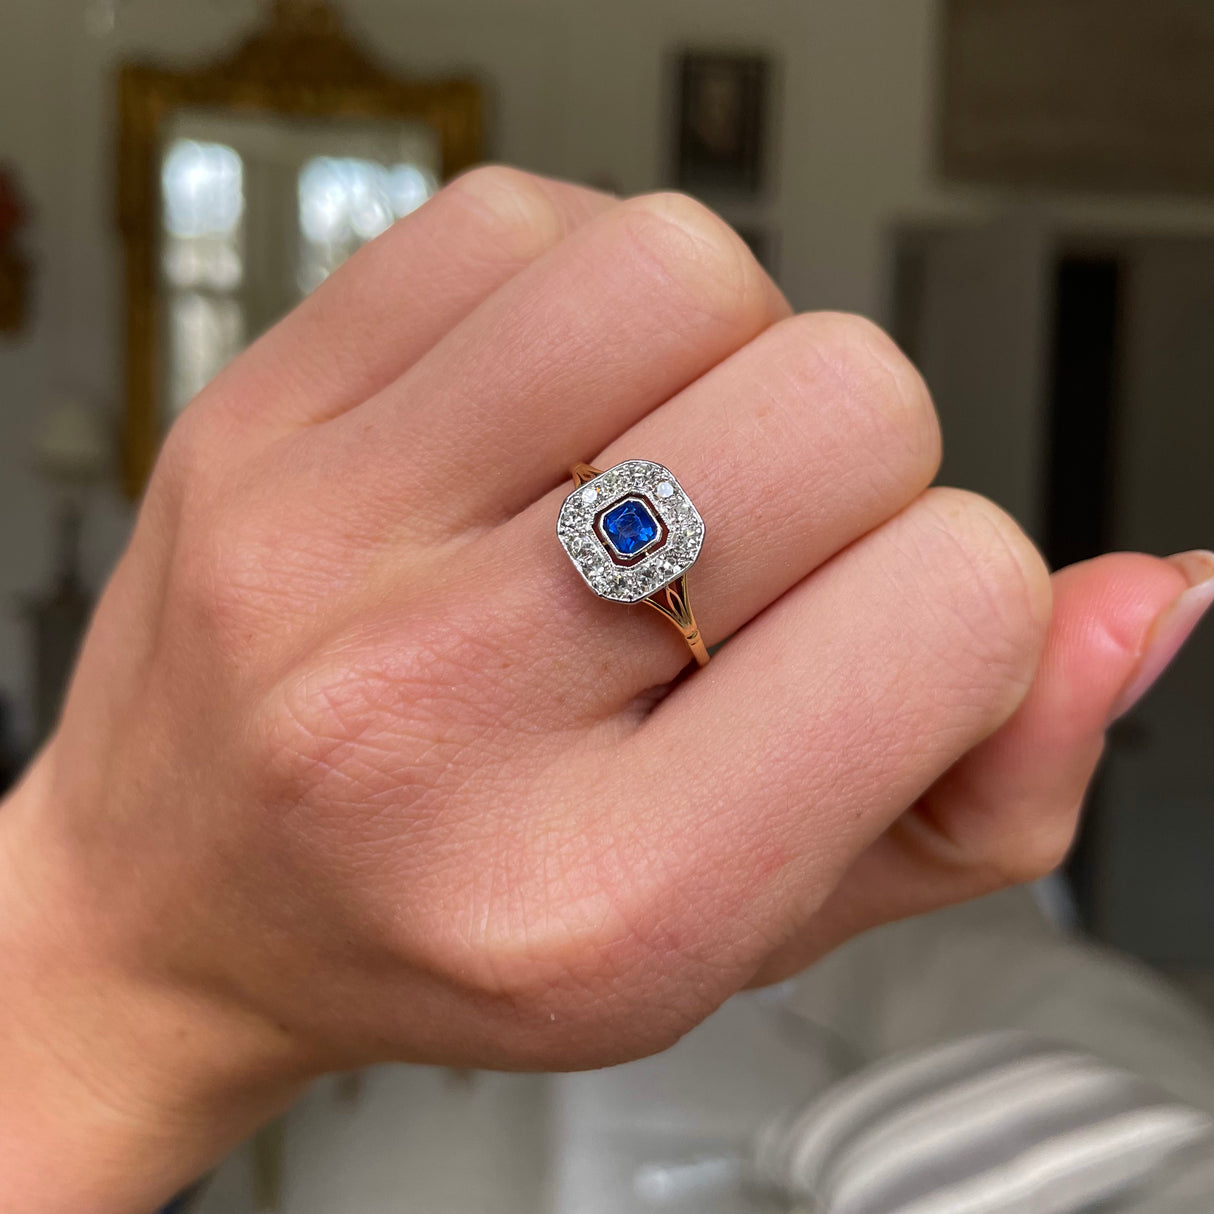 Sapphire and diamond engagement ring, worn on hand.